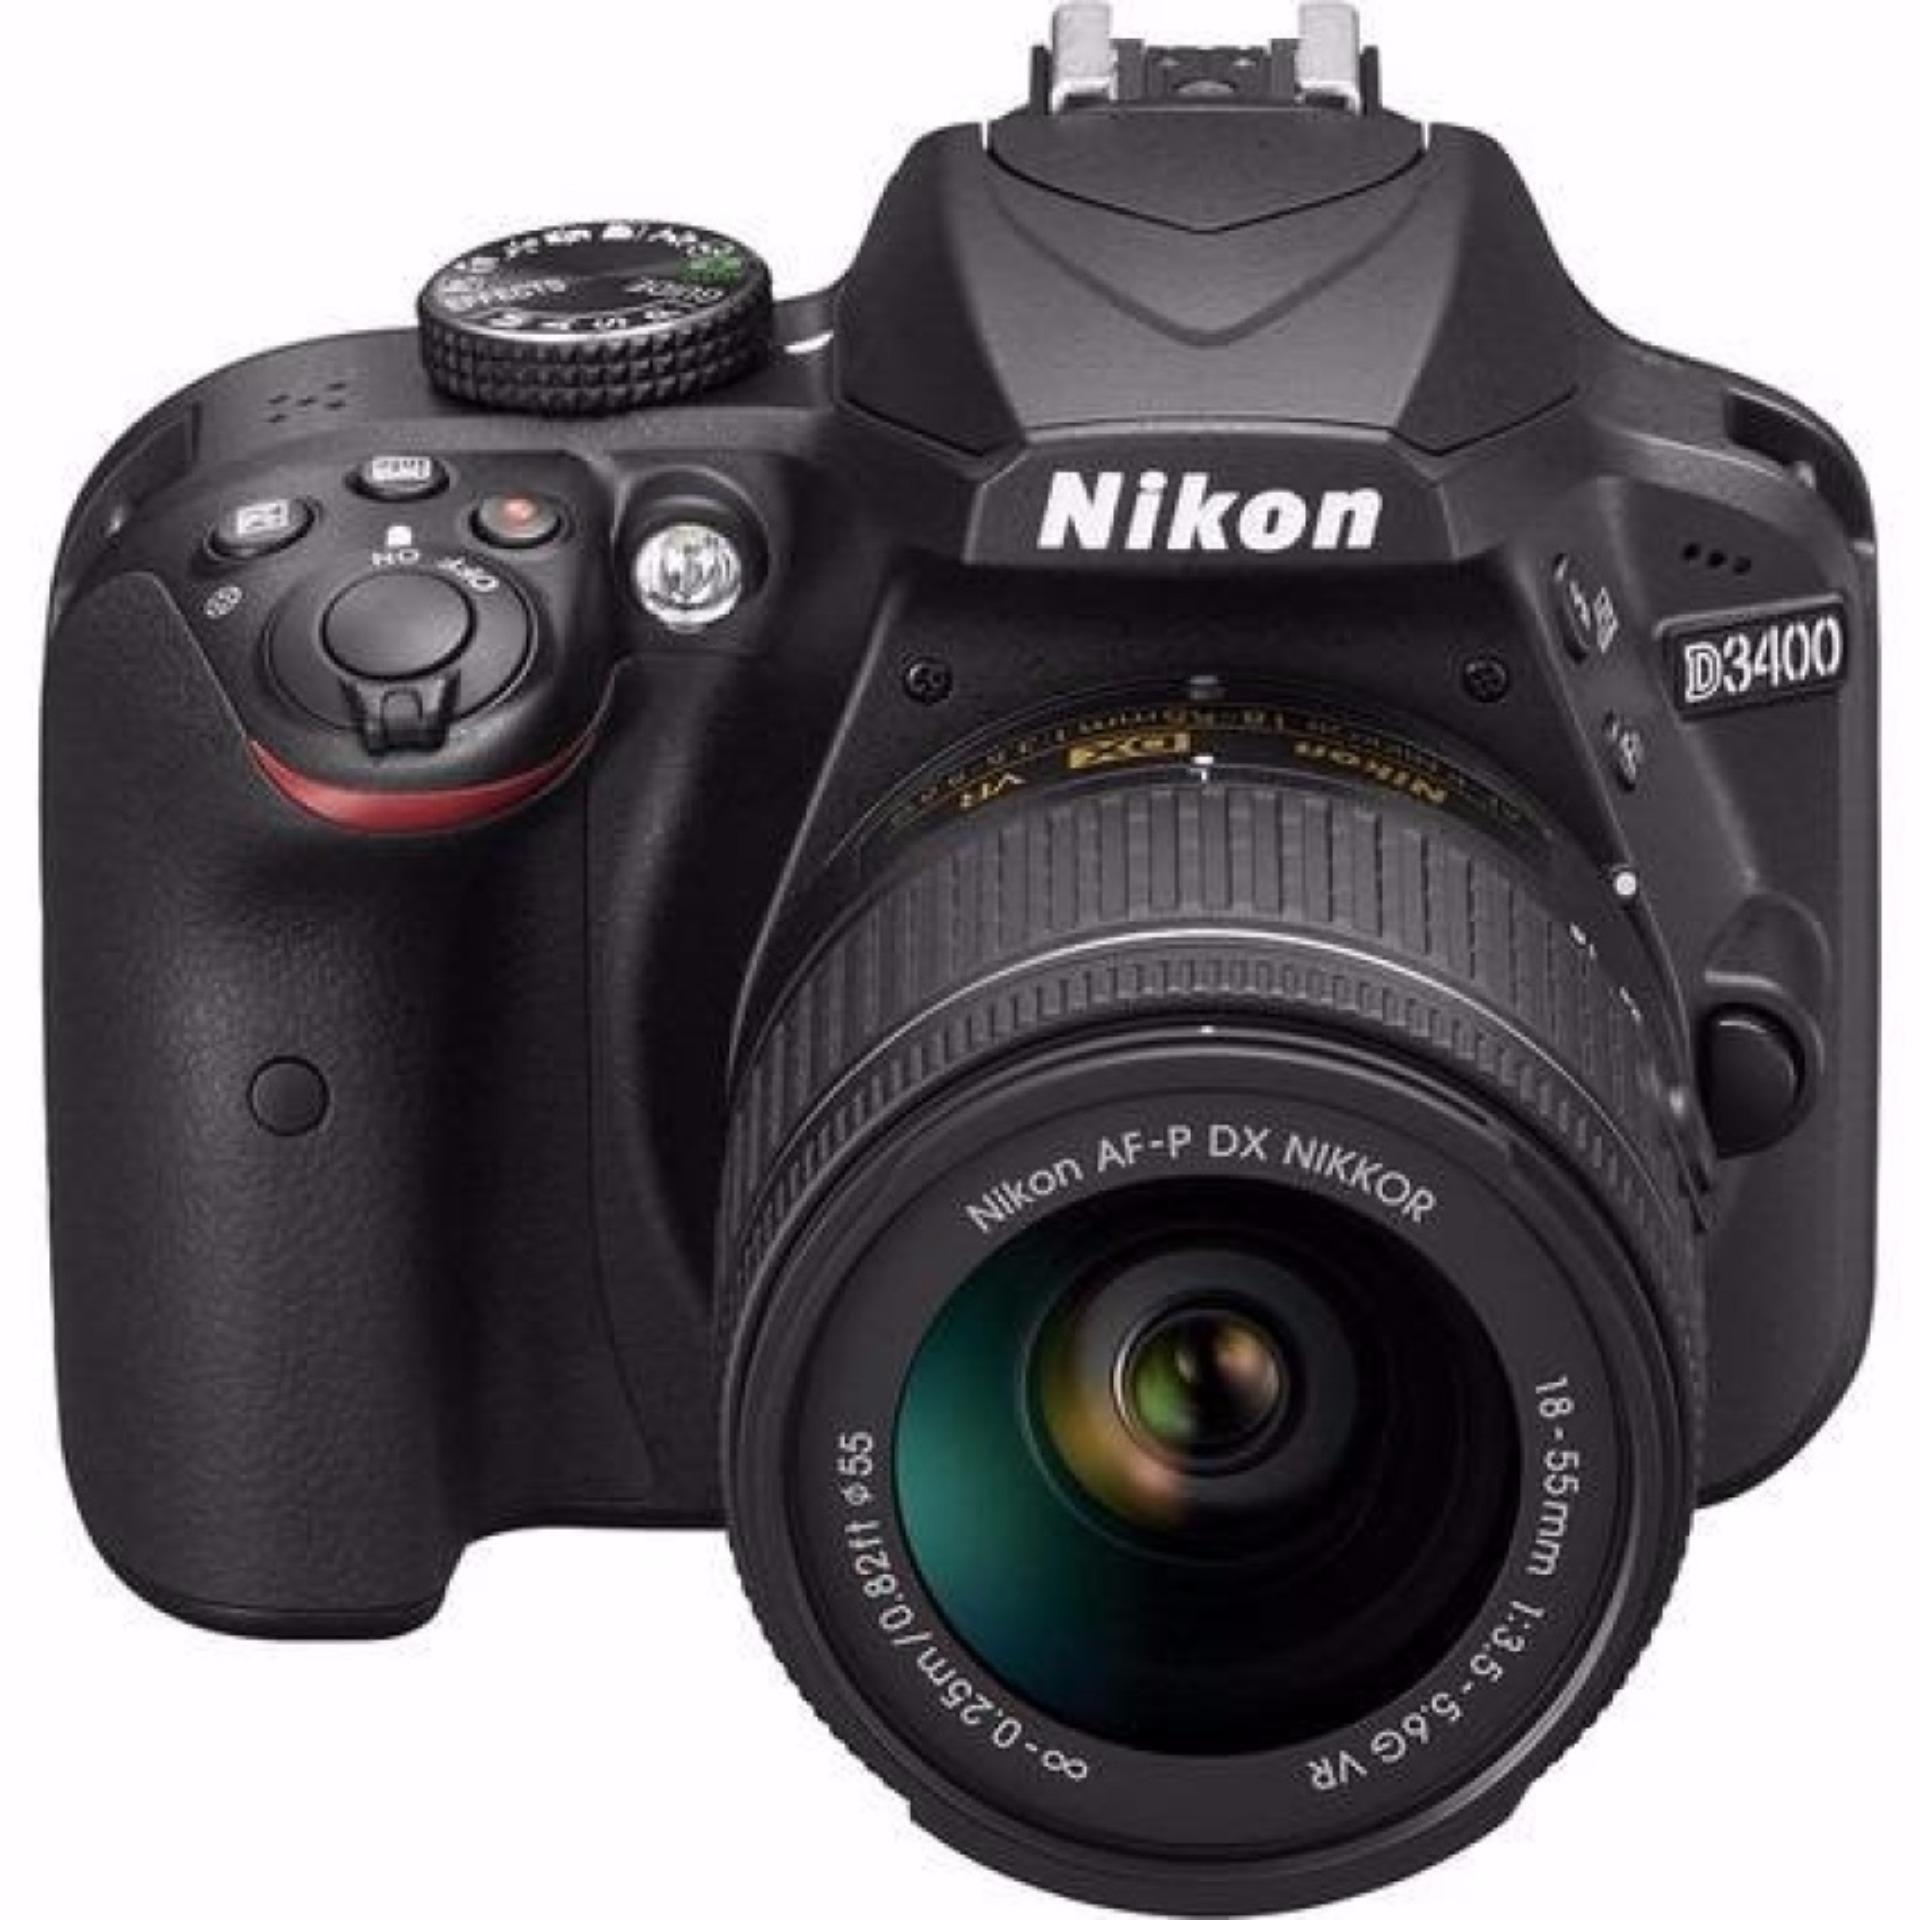 Nikon D3400 DSLR with 18-55mm + UV filter + Nikon Promotion (Please note that price is after Cash back)